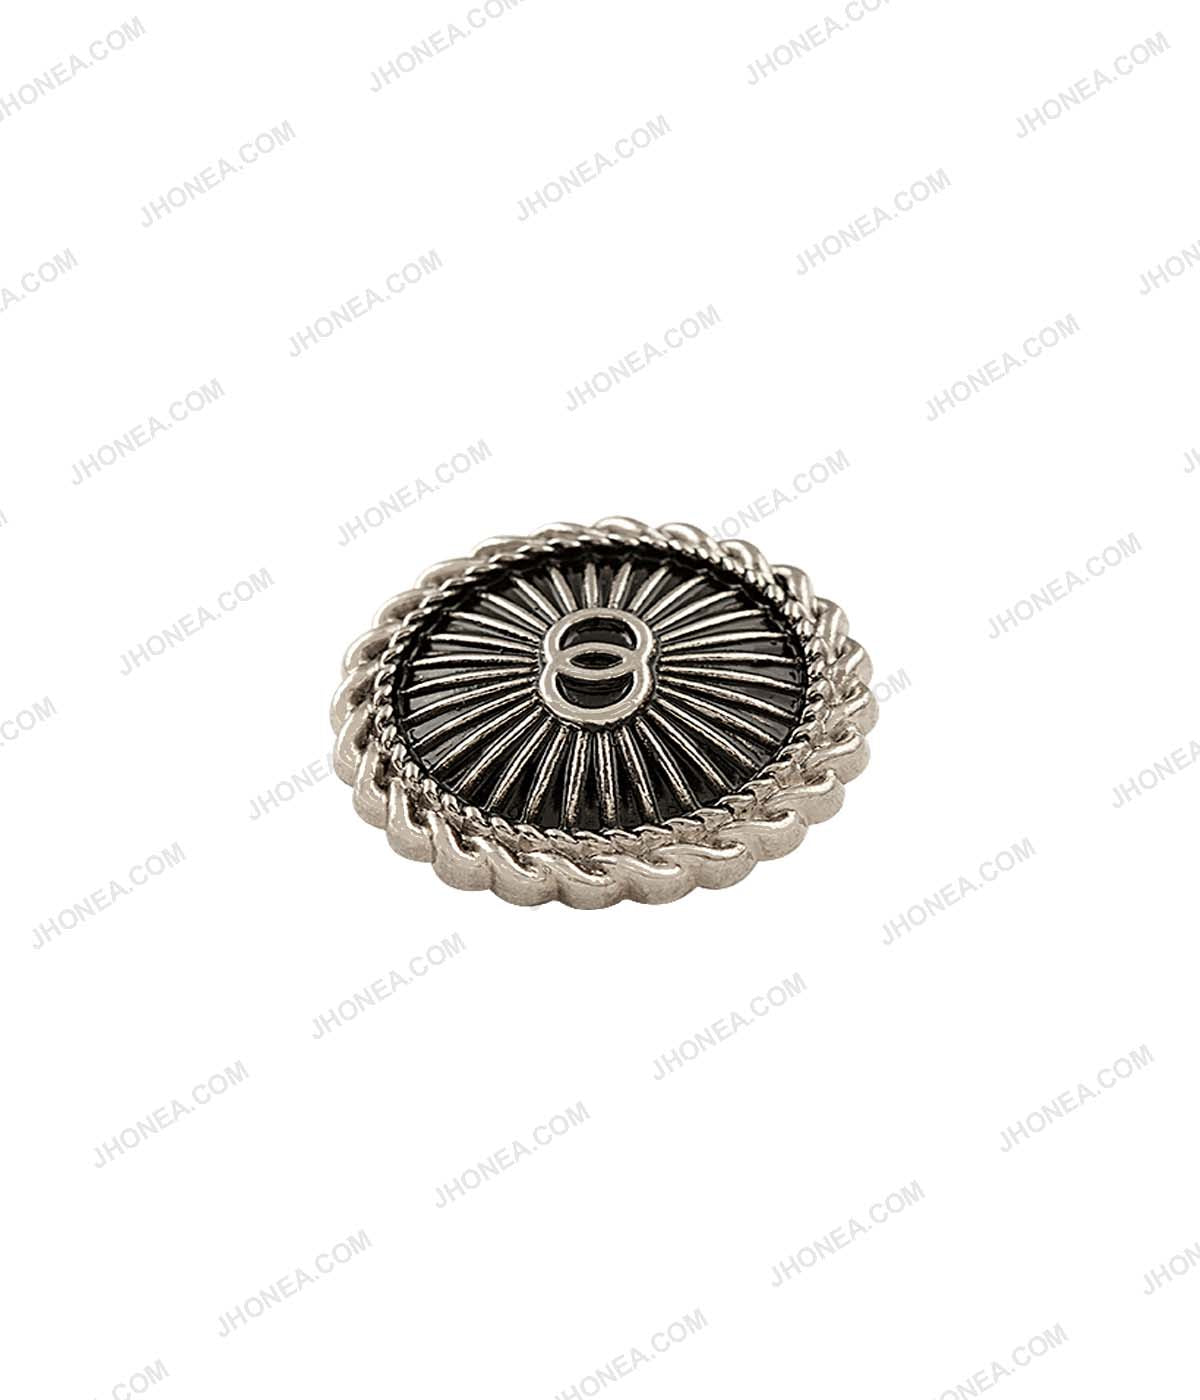 Accented Border Antique Silver Metal Shank Buttons for Men/Women